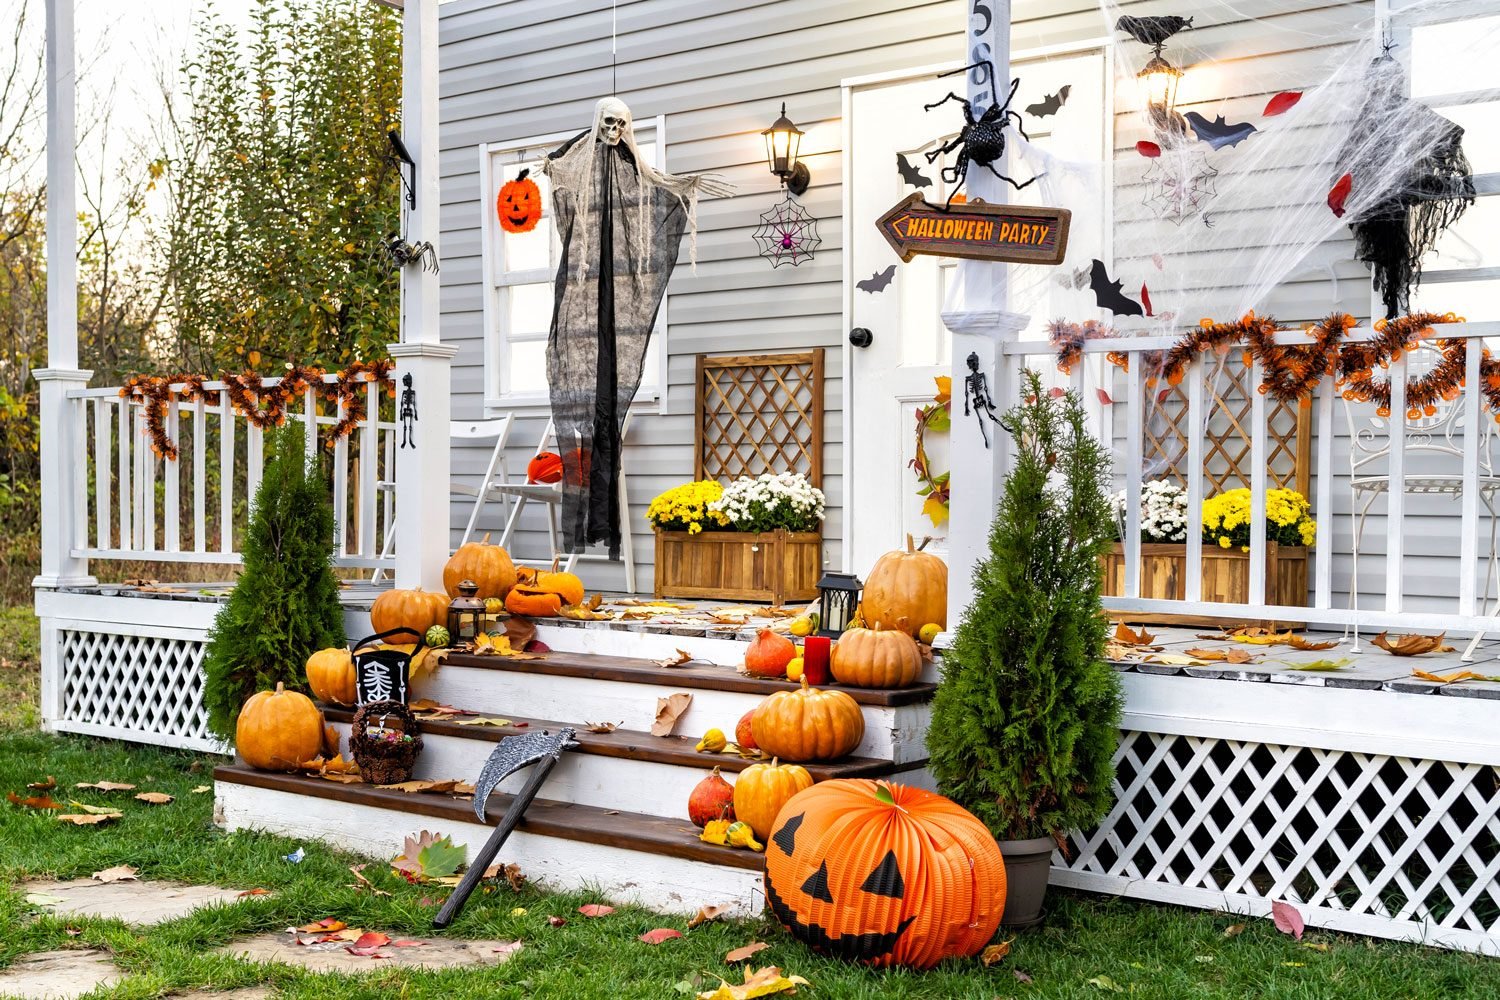 Well Lit Front Porch with Halloween Decorations such as Pumpkins, Bats, Garland, and assorted Fall Floral